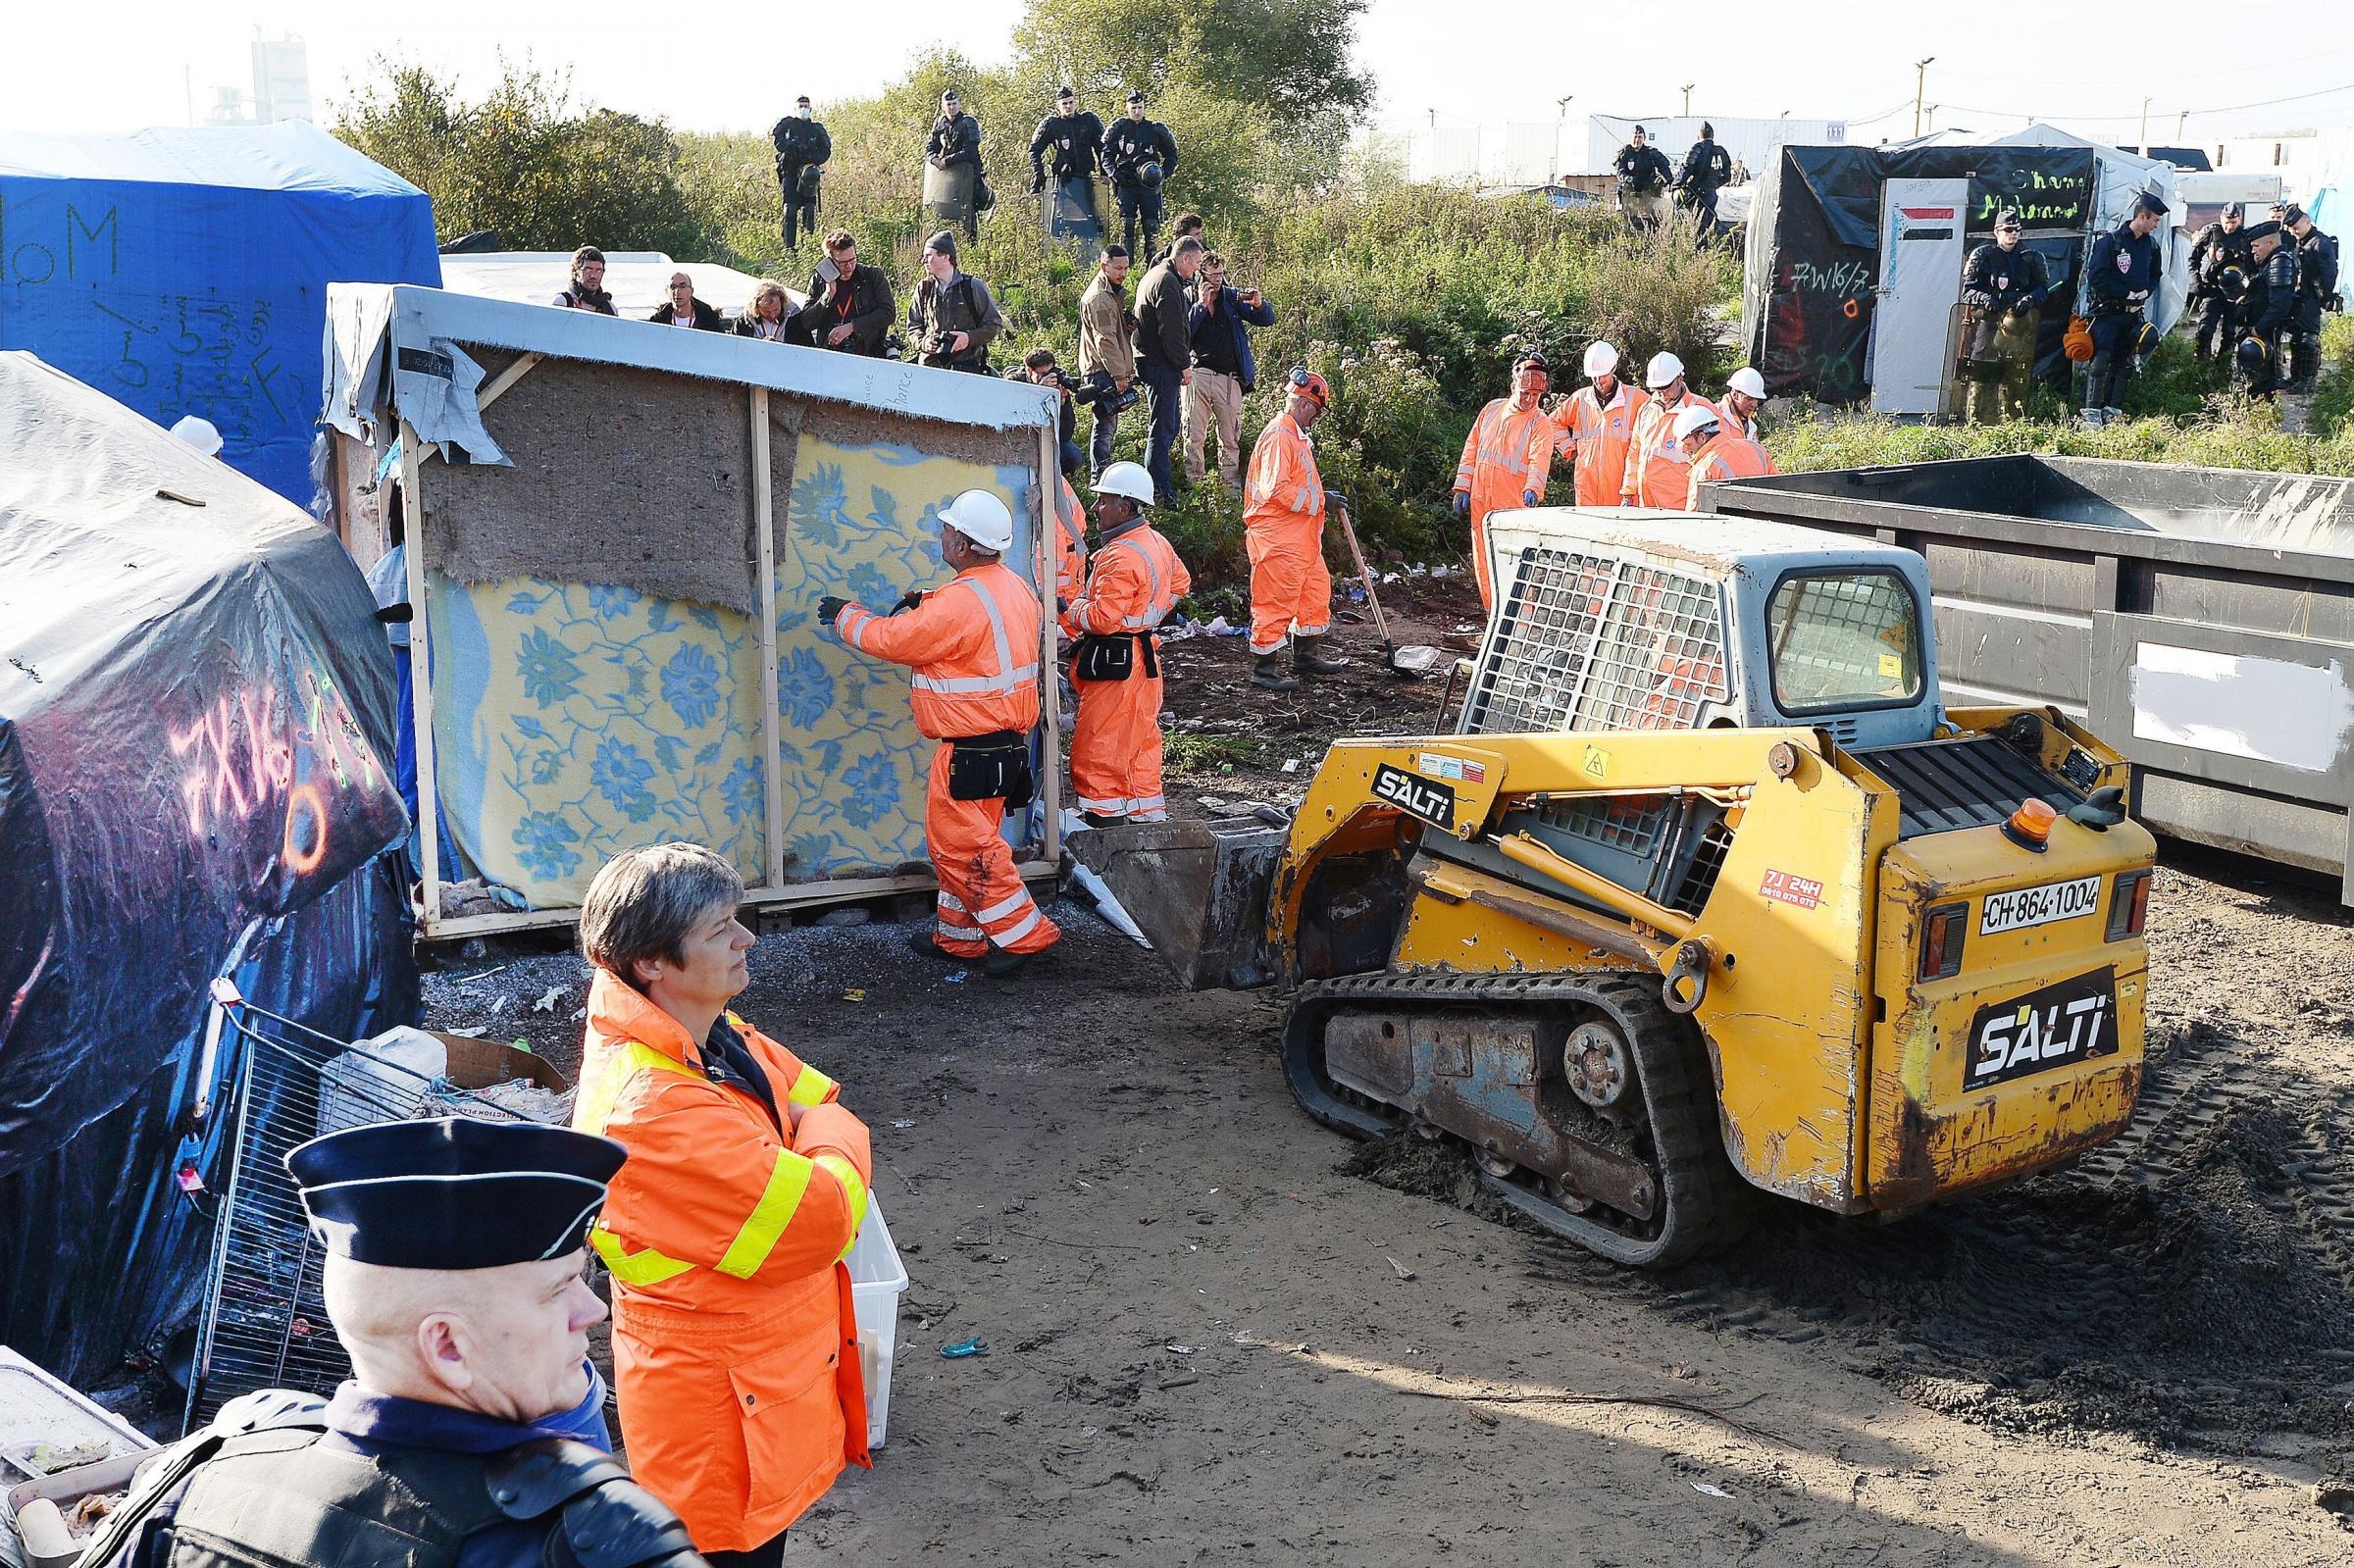 Bulldozers move in at Calais 'Jungle' camp as migrants leave by bus